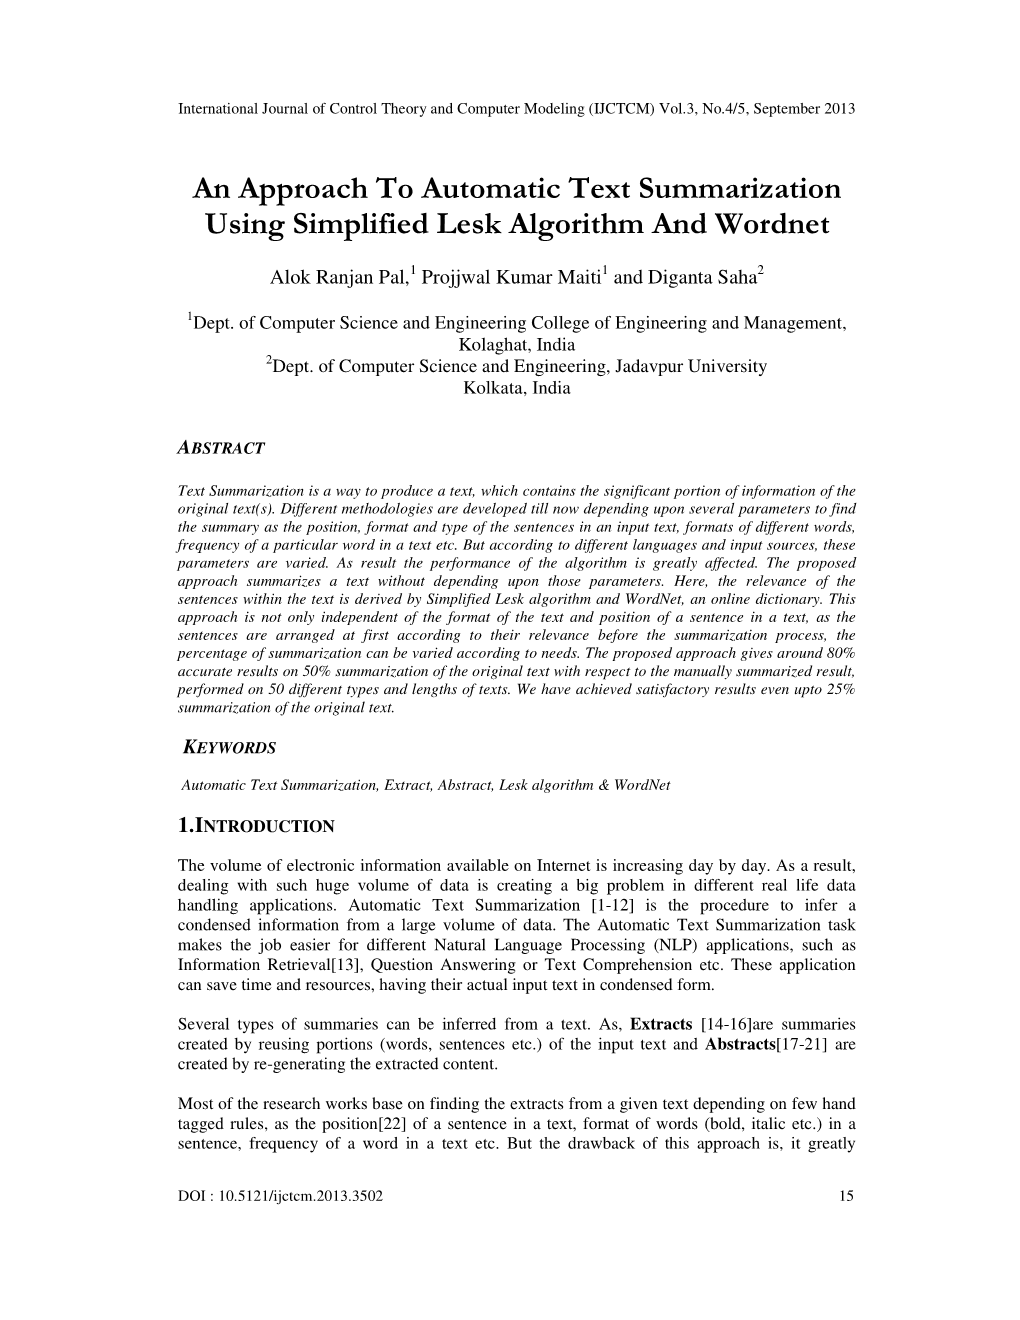 An Approach to Automatic Text Summarization Using Simplified Lesk Algorithm and Wordnet